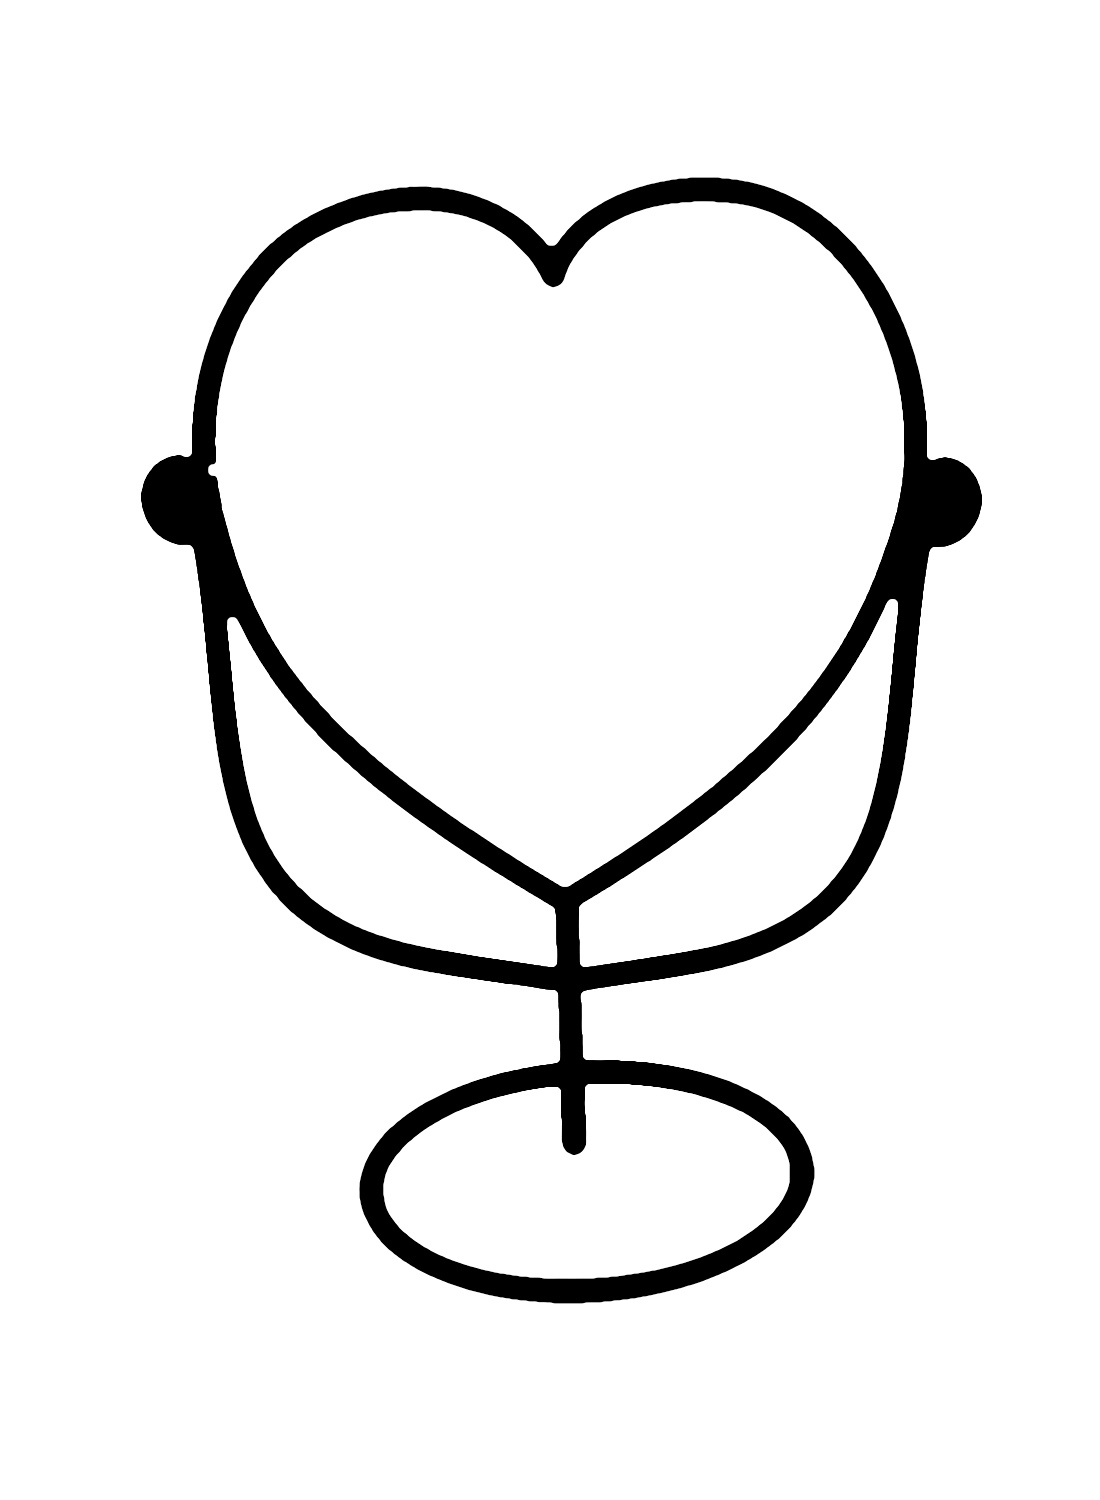 Table Mirror Coloring Page